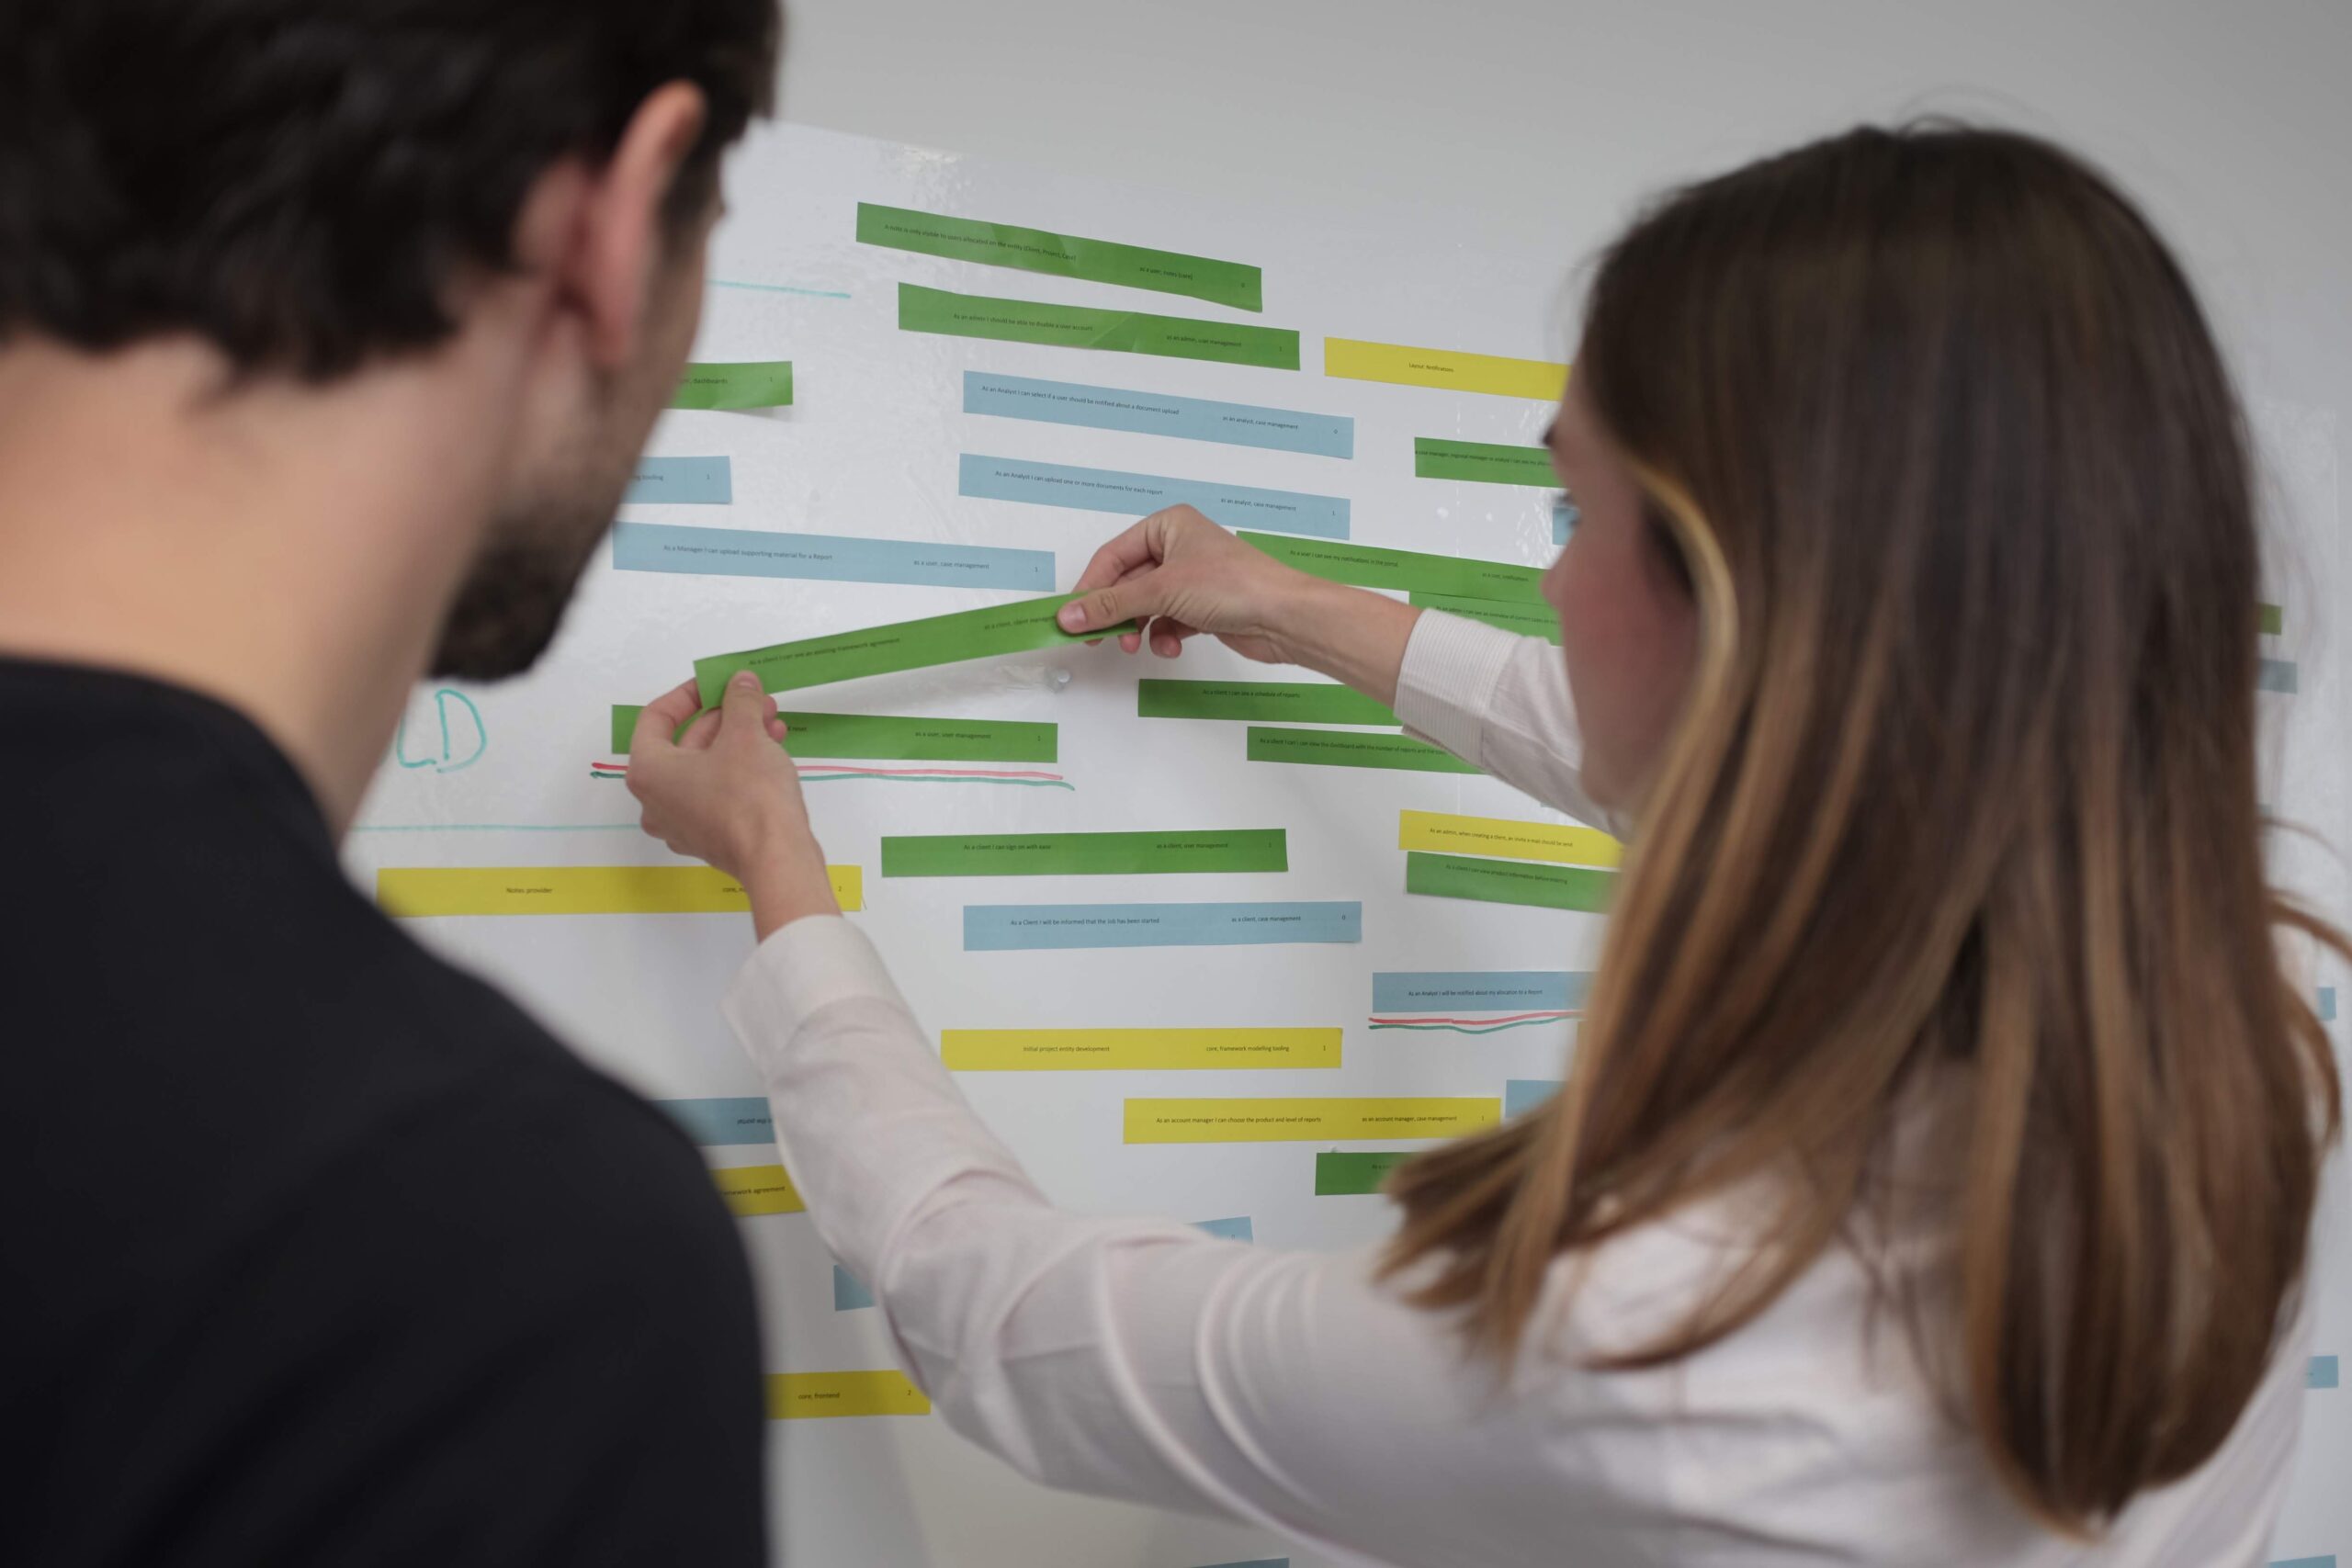 Two people take part in a project brief discovery phase by sorting user journey tabs